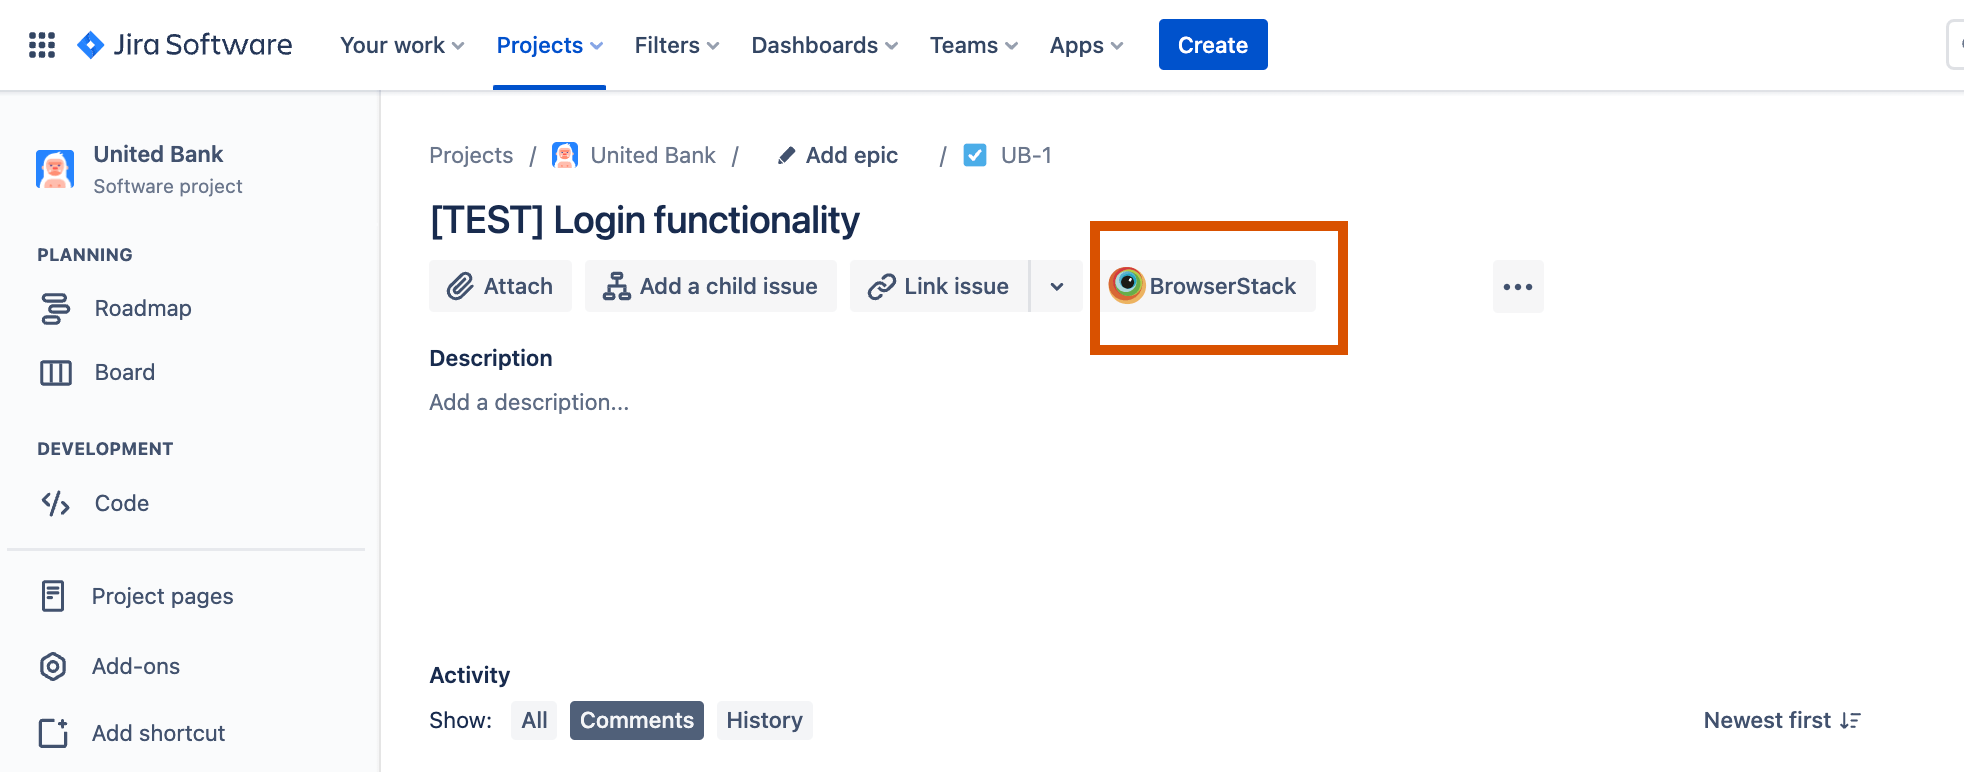 BrowserStack app in Jira Issue